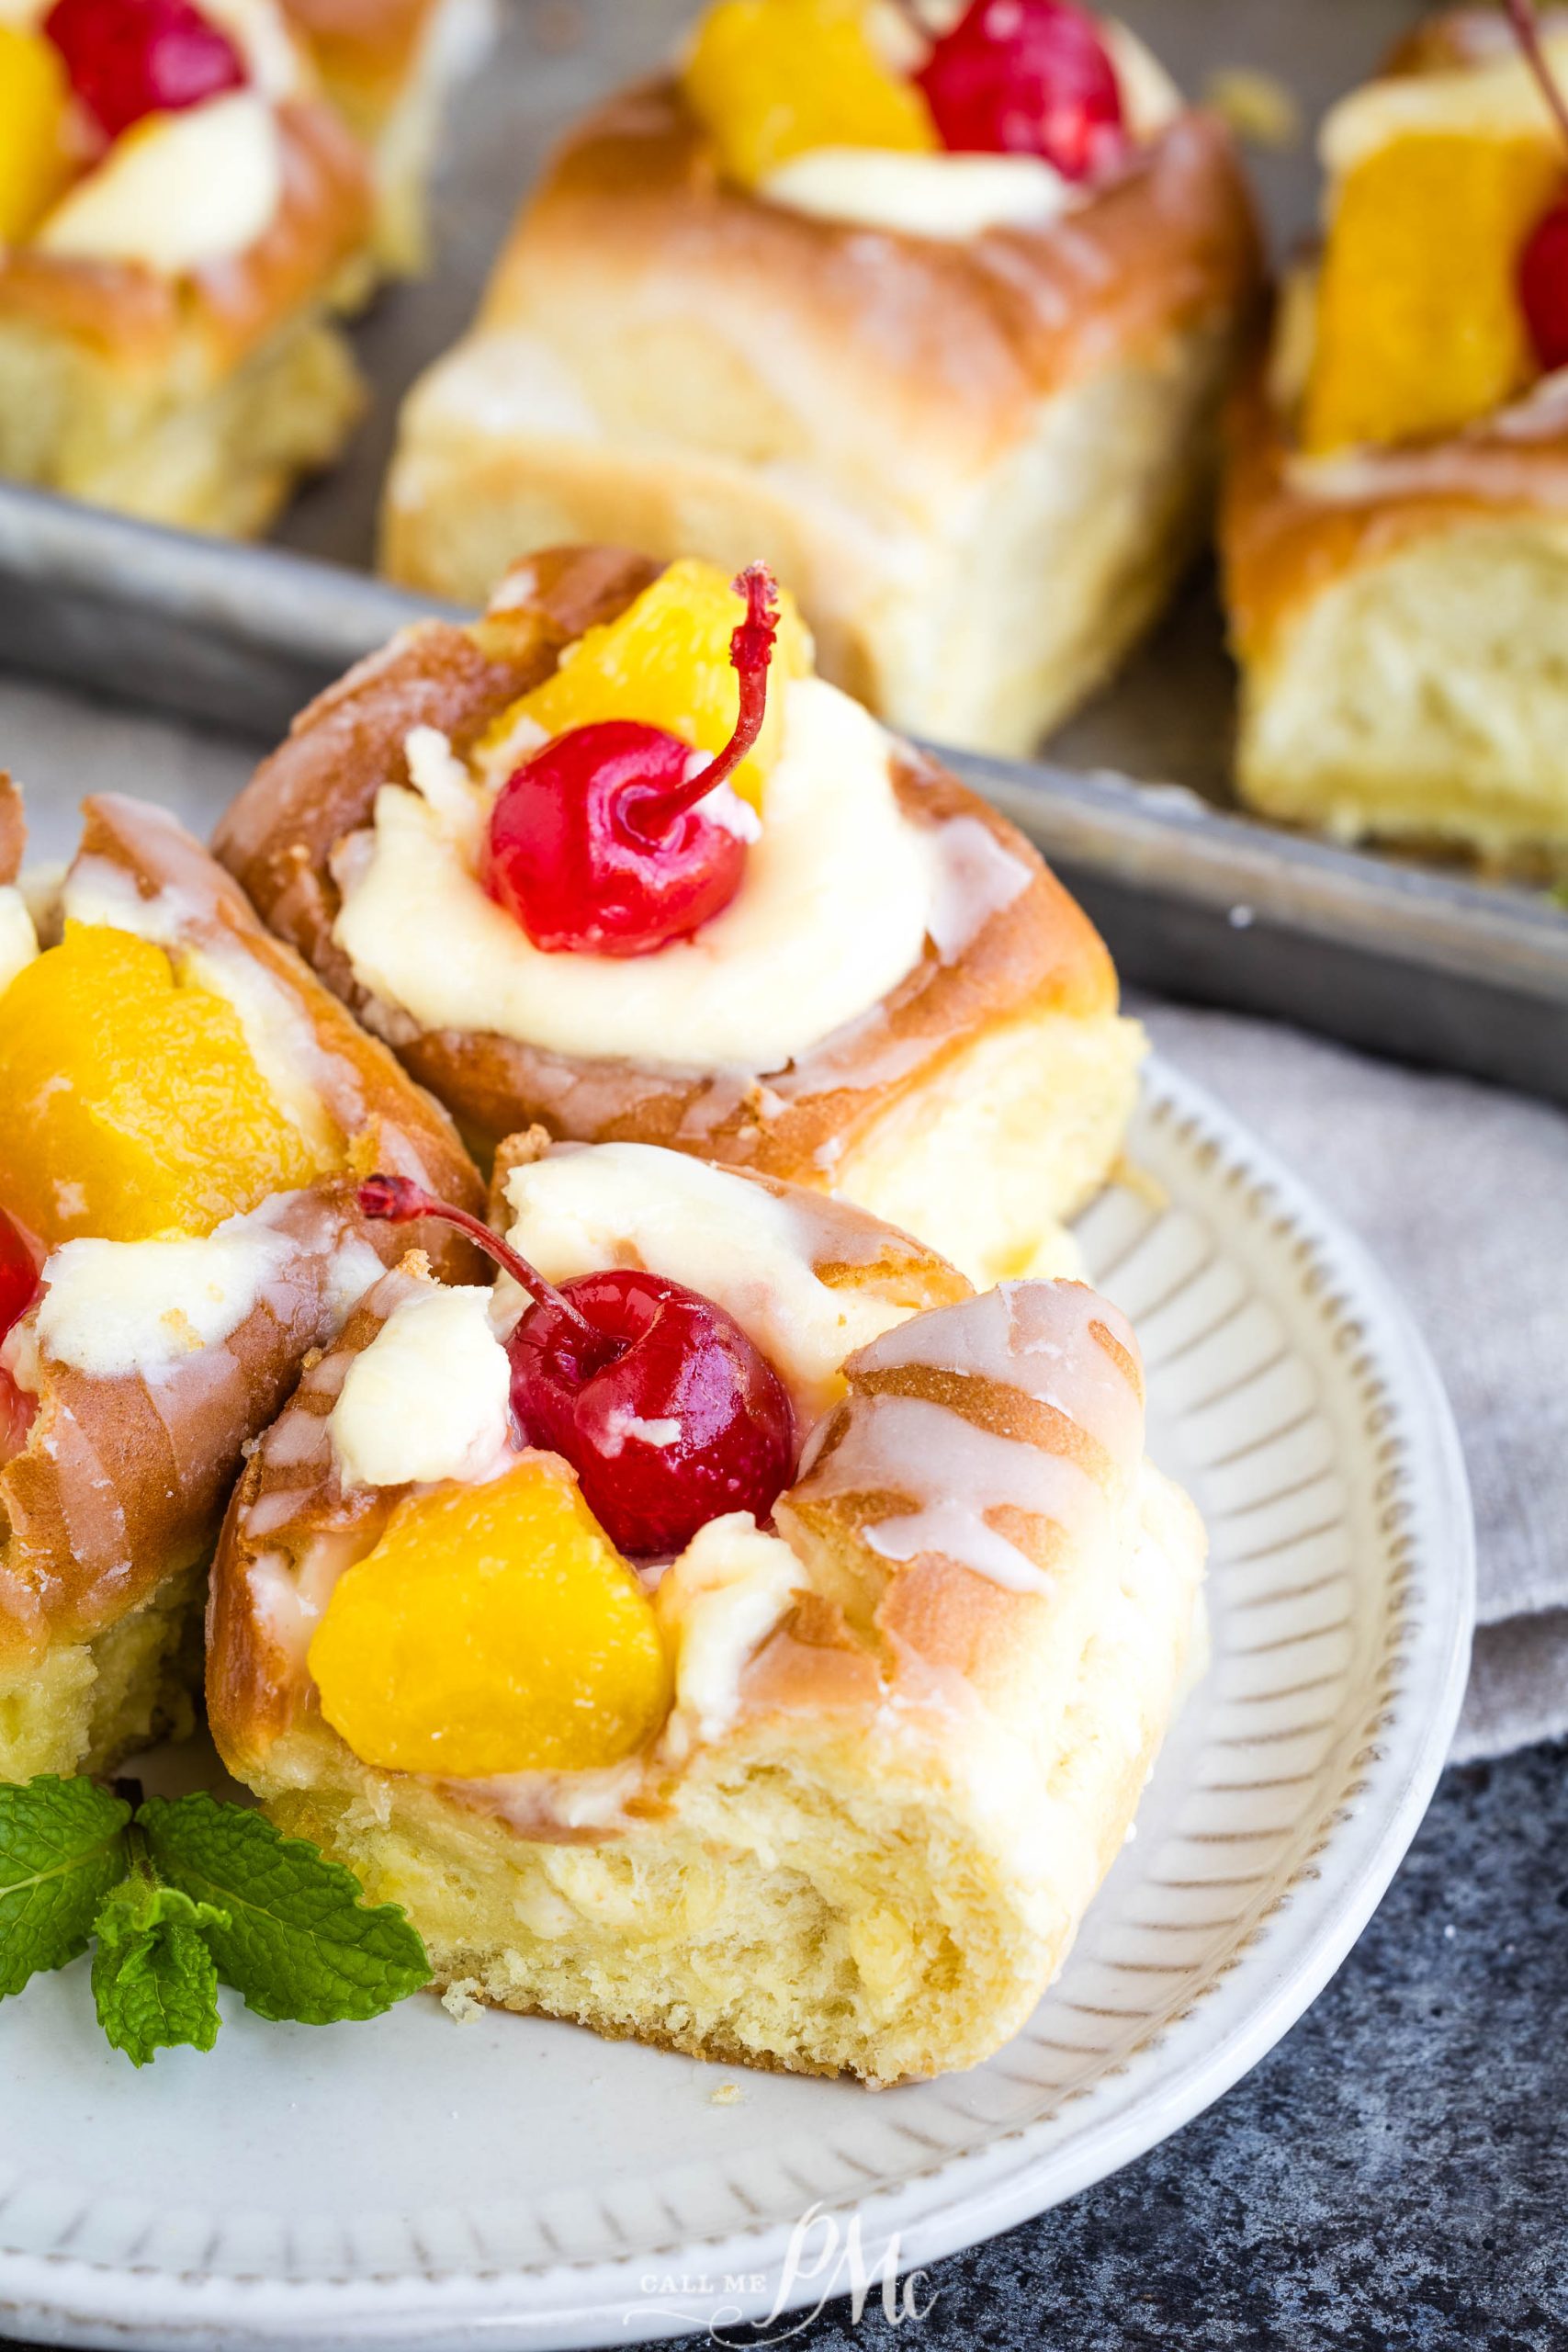 A plate of fruit-topped pastries garnished with cherries and a drizzle of icing.